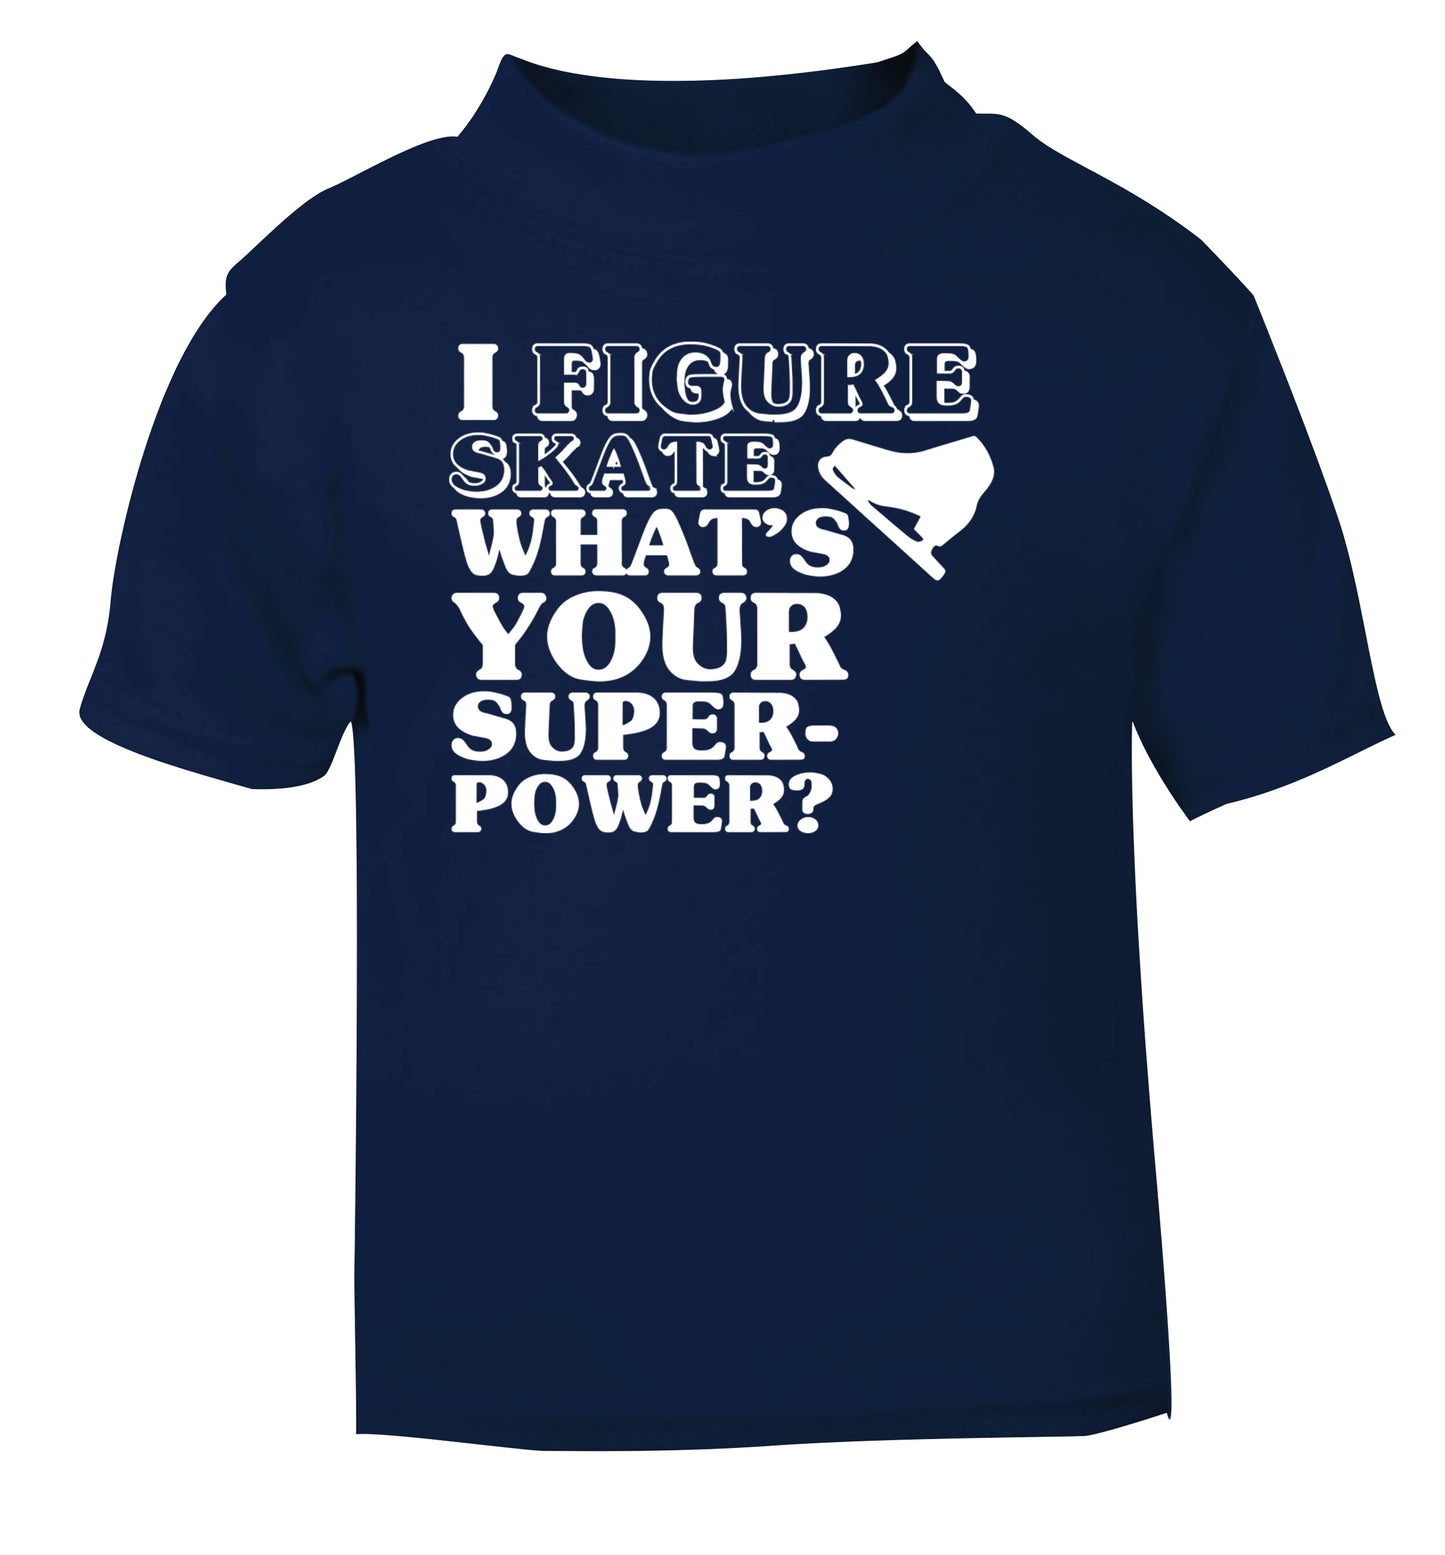 I figure skate what's your superpower? navy Baby Toddler Tshirt 2 Years